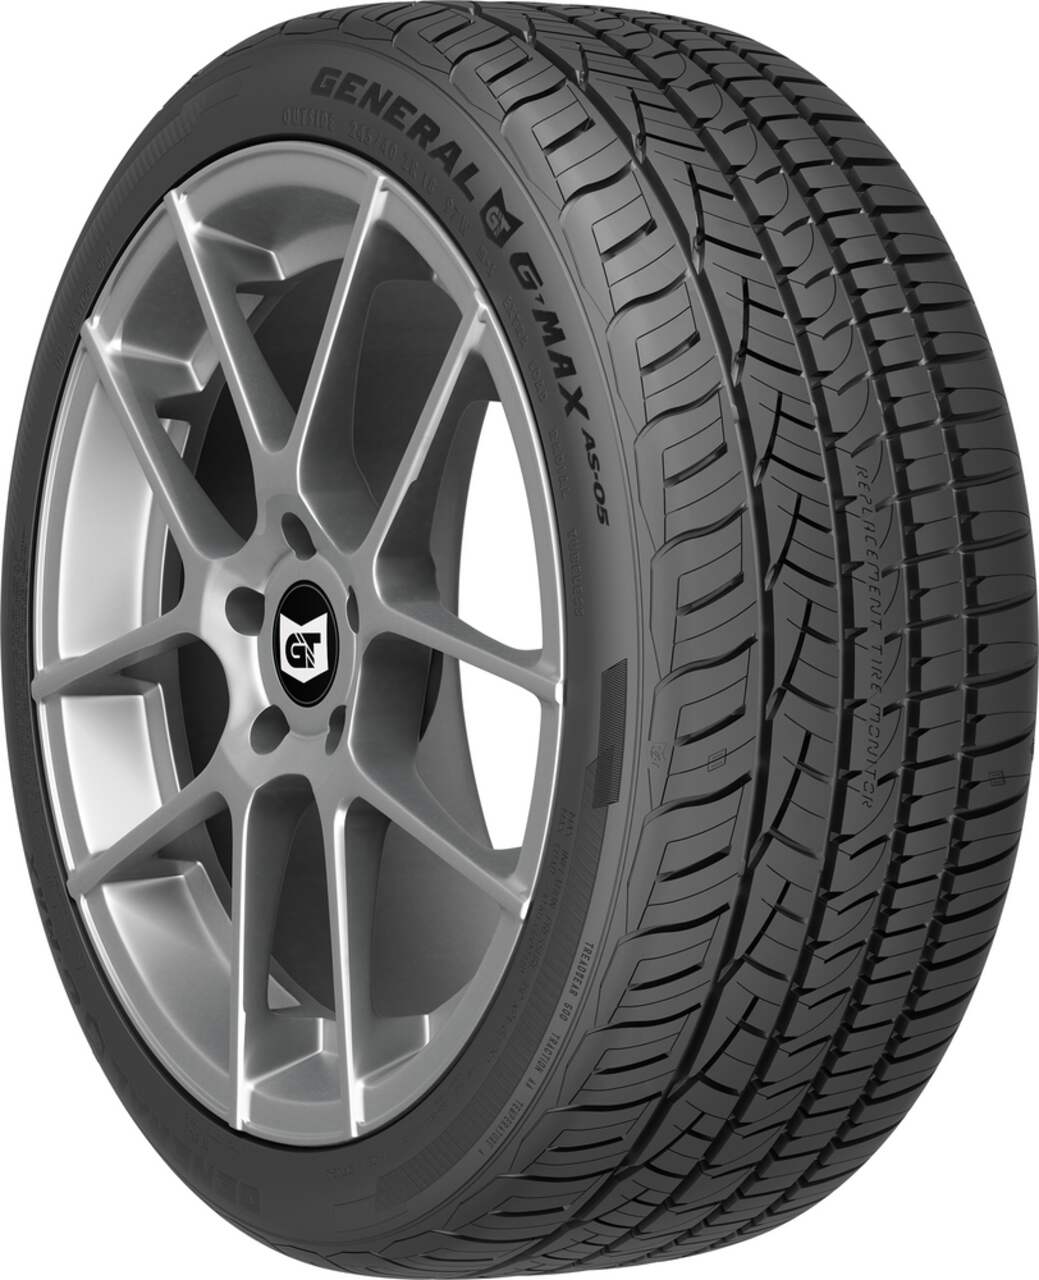 General Tire G-Max AS-05 All Season Tire For Passenger & CUV